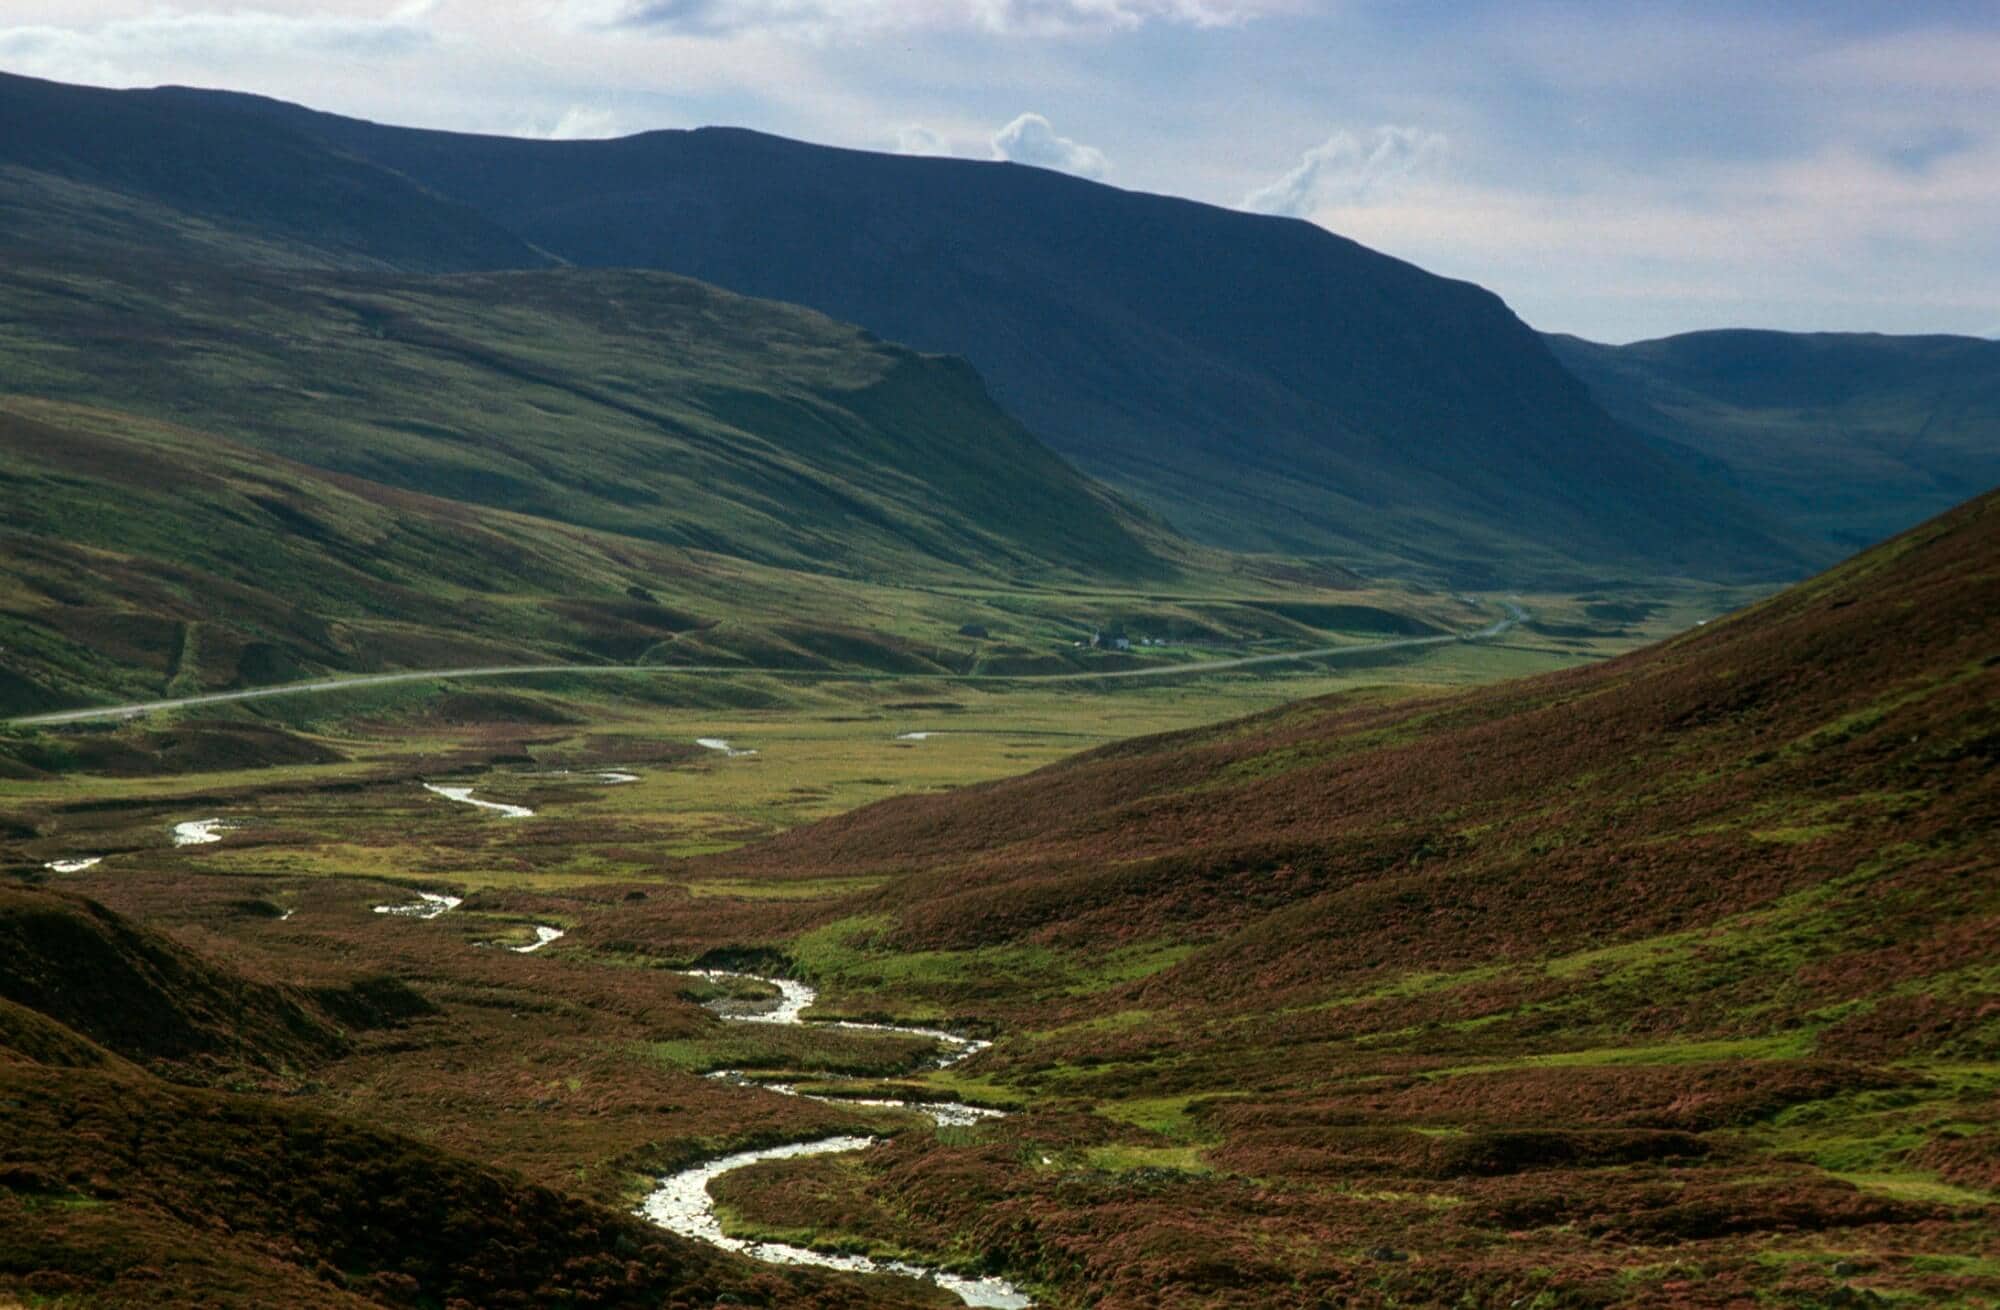 Heather covered moorland of Glenshee, with hills either side of the valley of Perth & Kenross